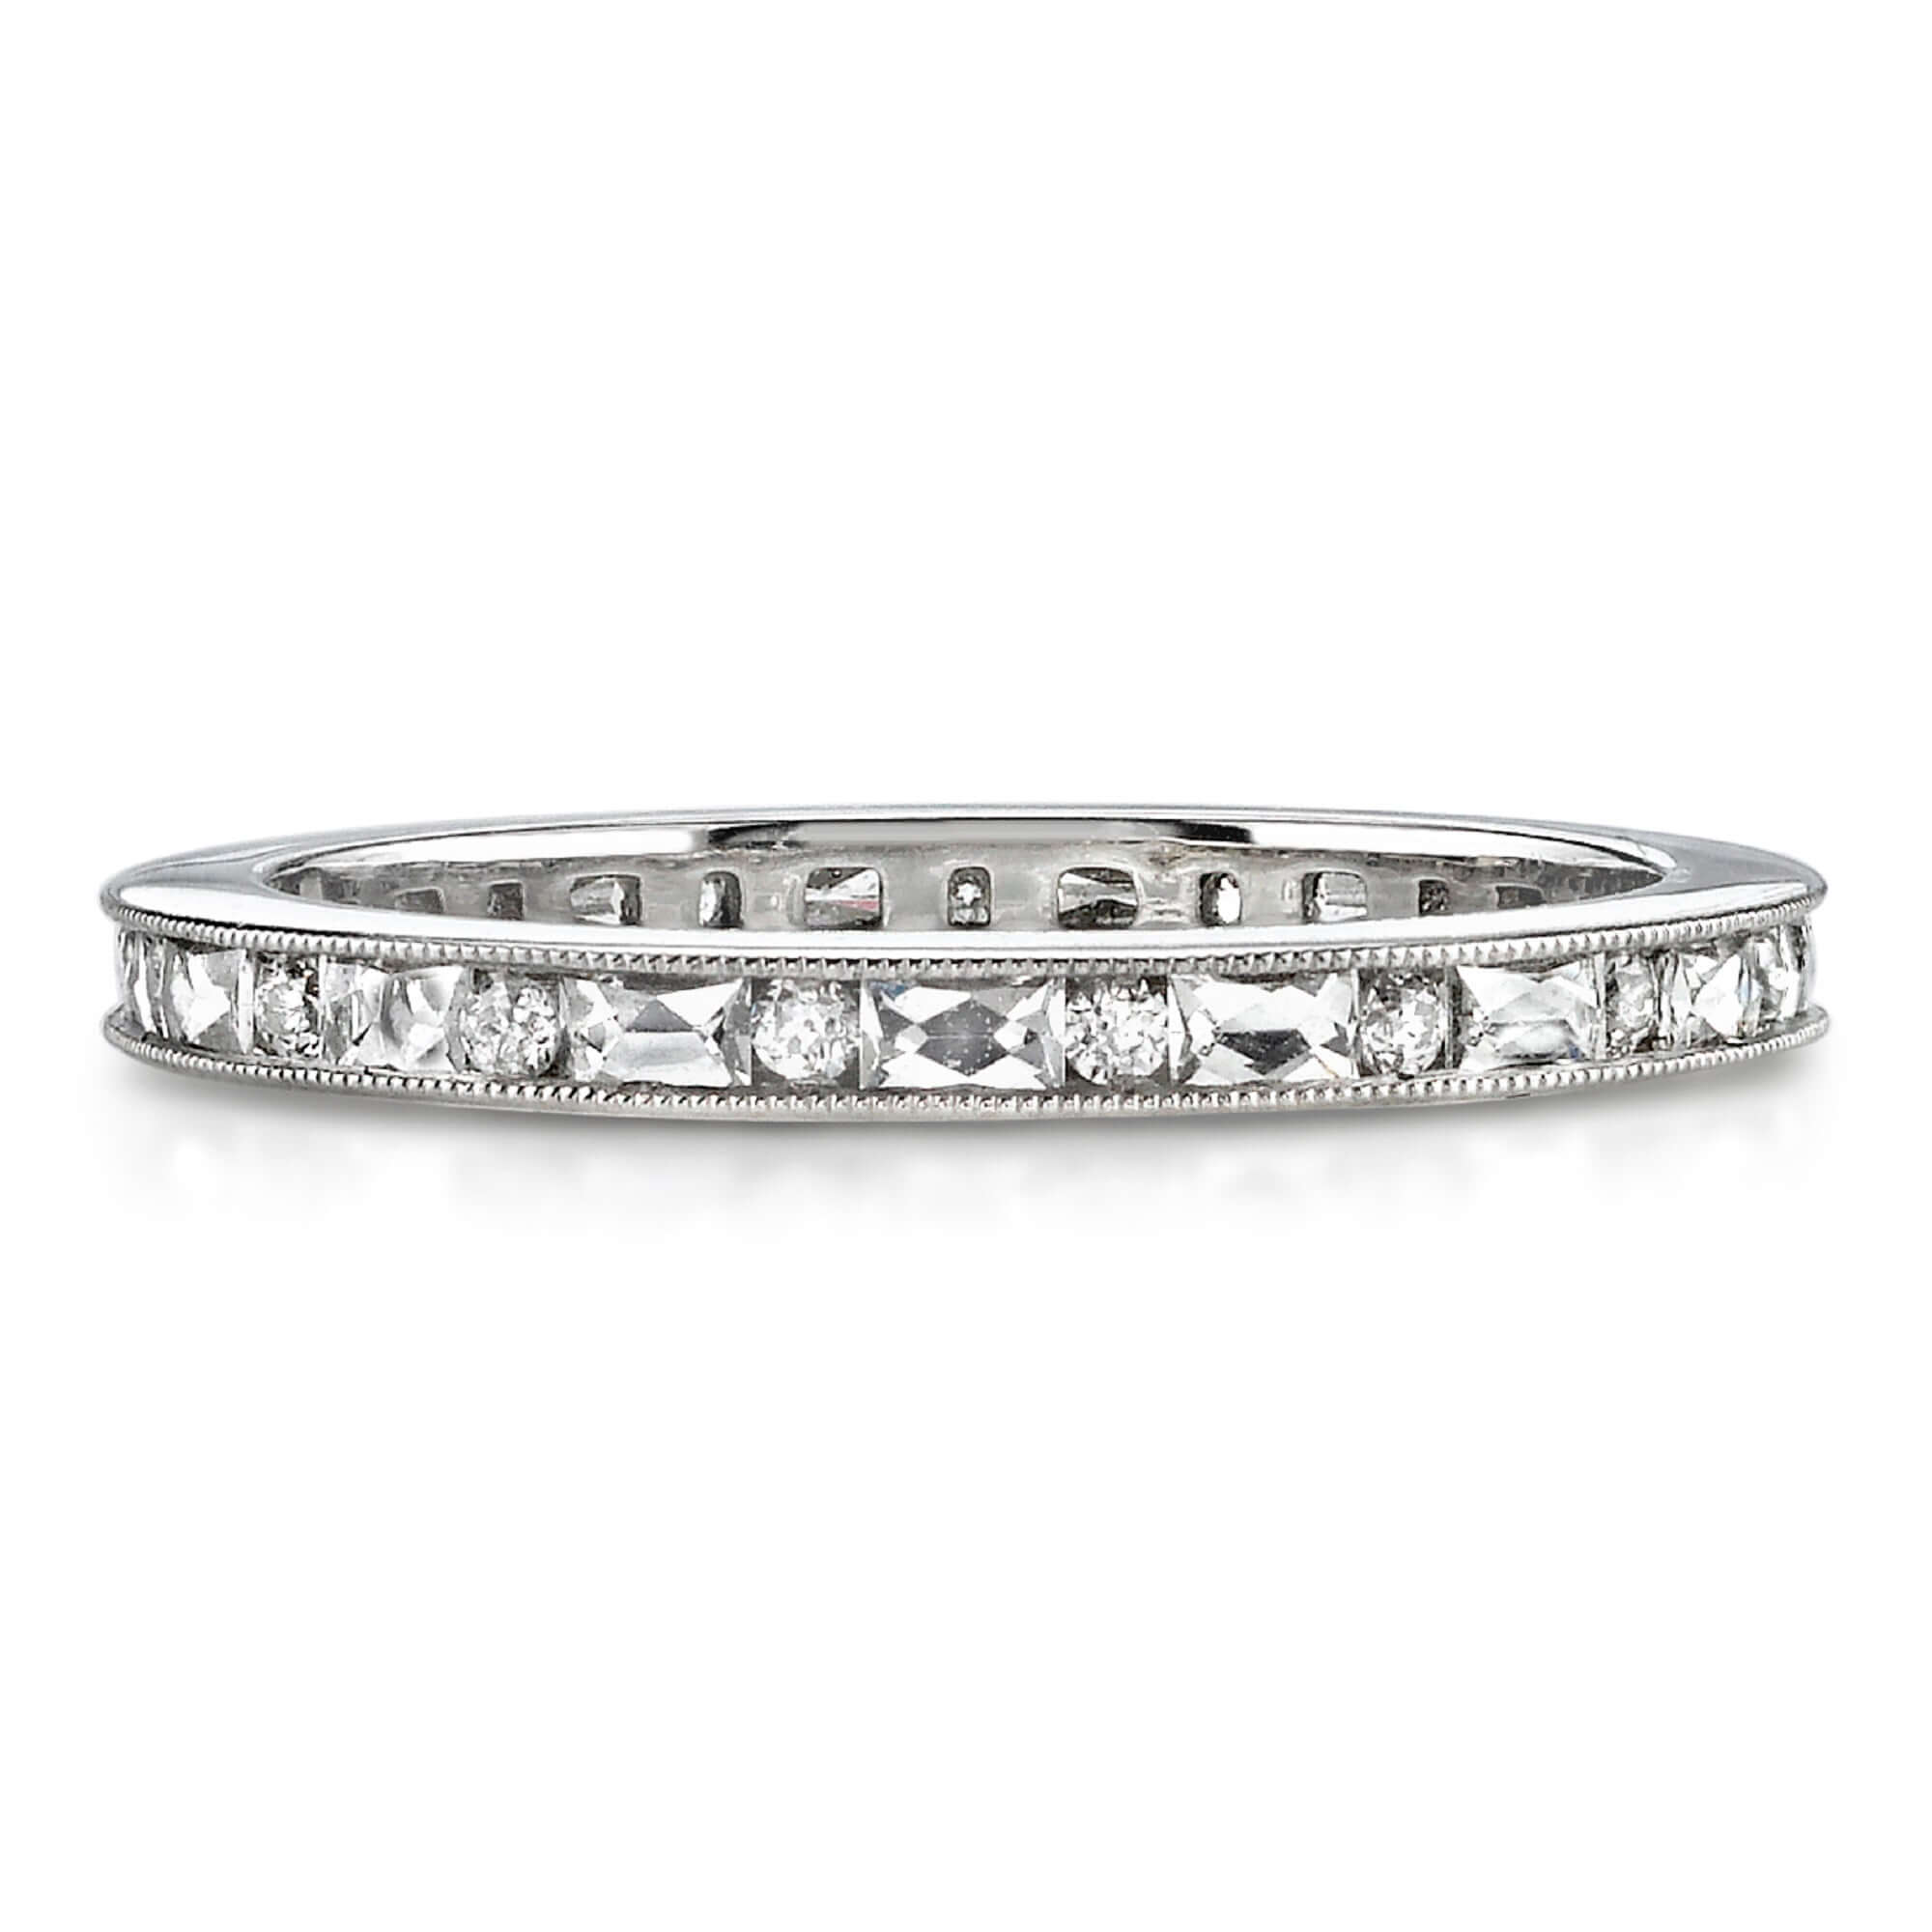 SINGLE STONE MICHELLE BAND | Approximately 0.65ctw French cut and old European cut diamonds set in a handcrafted channel set eternity band. ﻿Approximate band width 2.1mm. All of our jewelry is individually made to order in Los Angeles, please allow 6-8 we